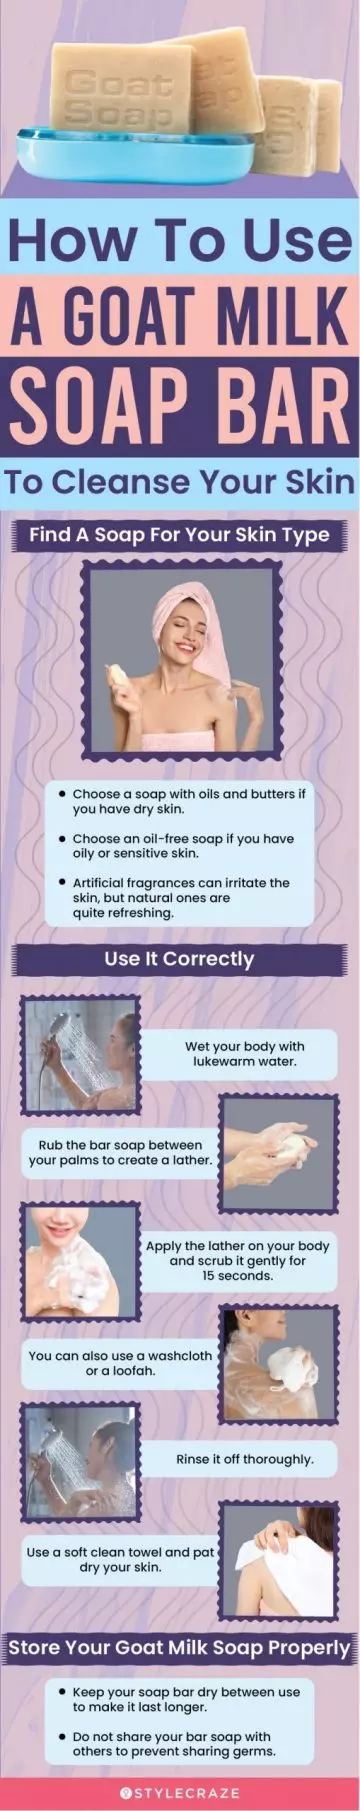 How To Use A Goat Milk Soap Bar To Cleanse Your Skin (infographic)